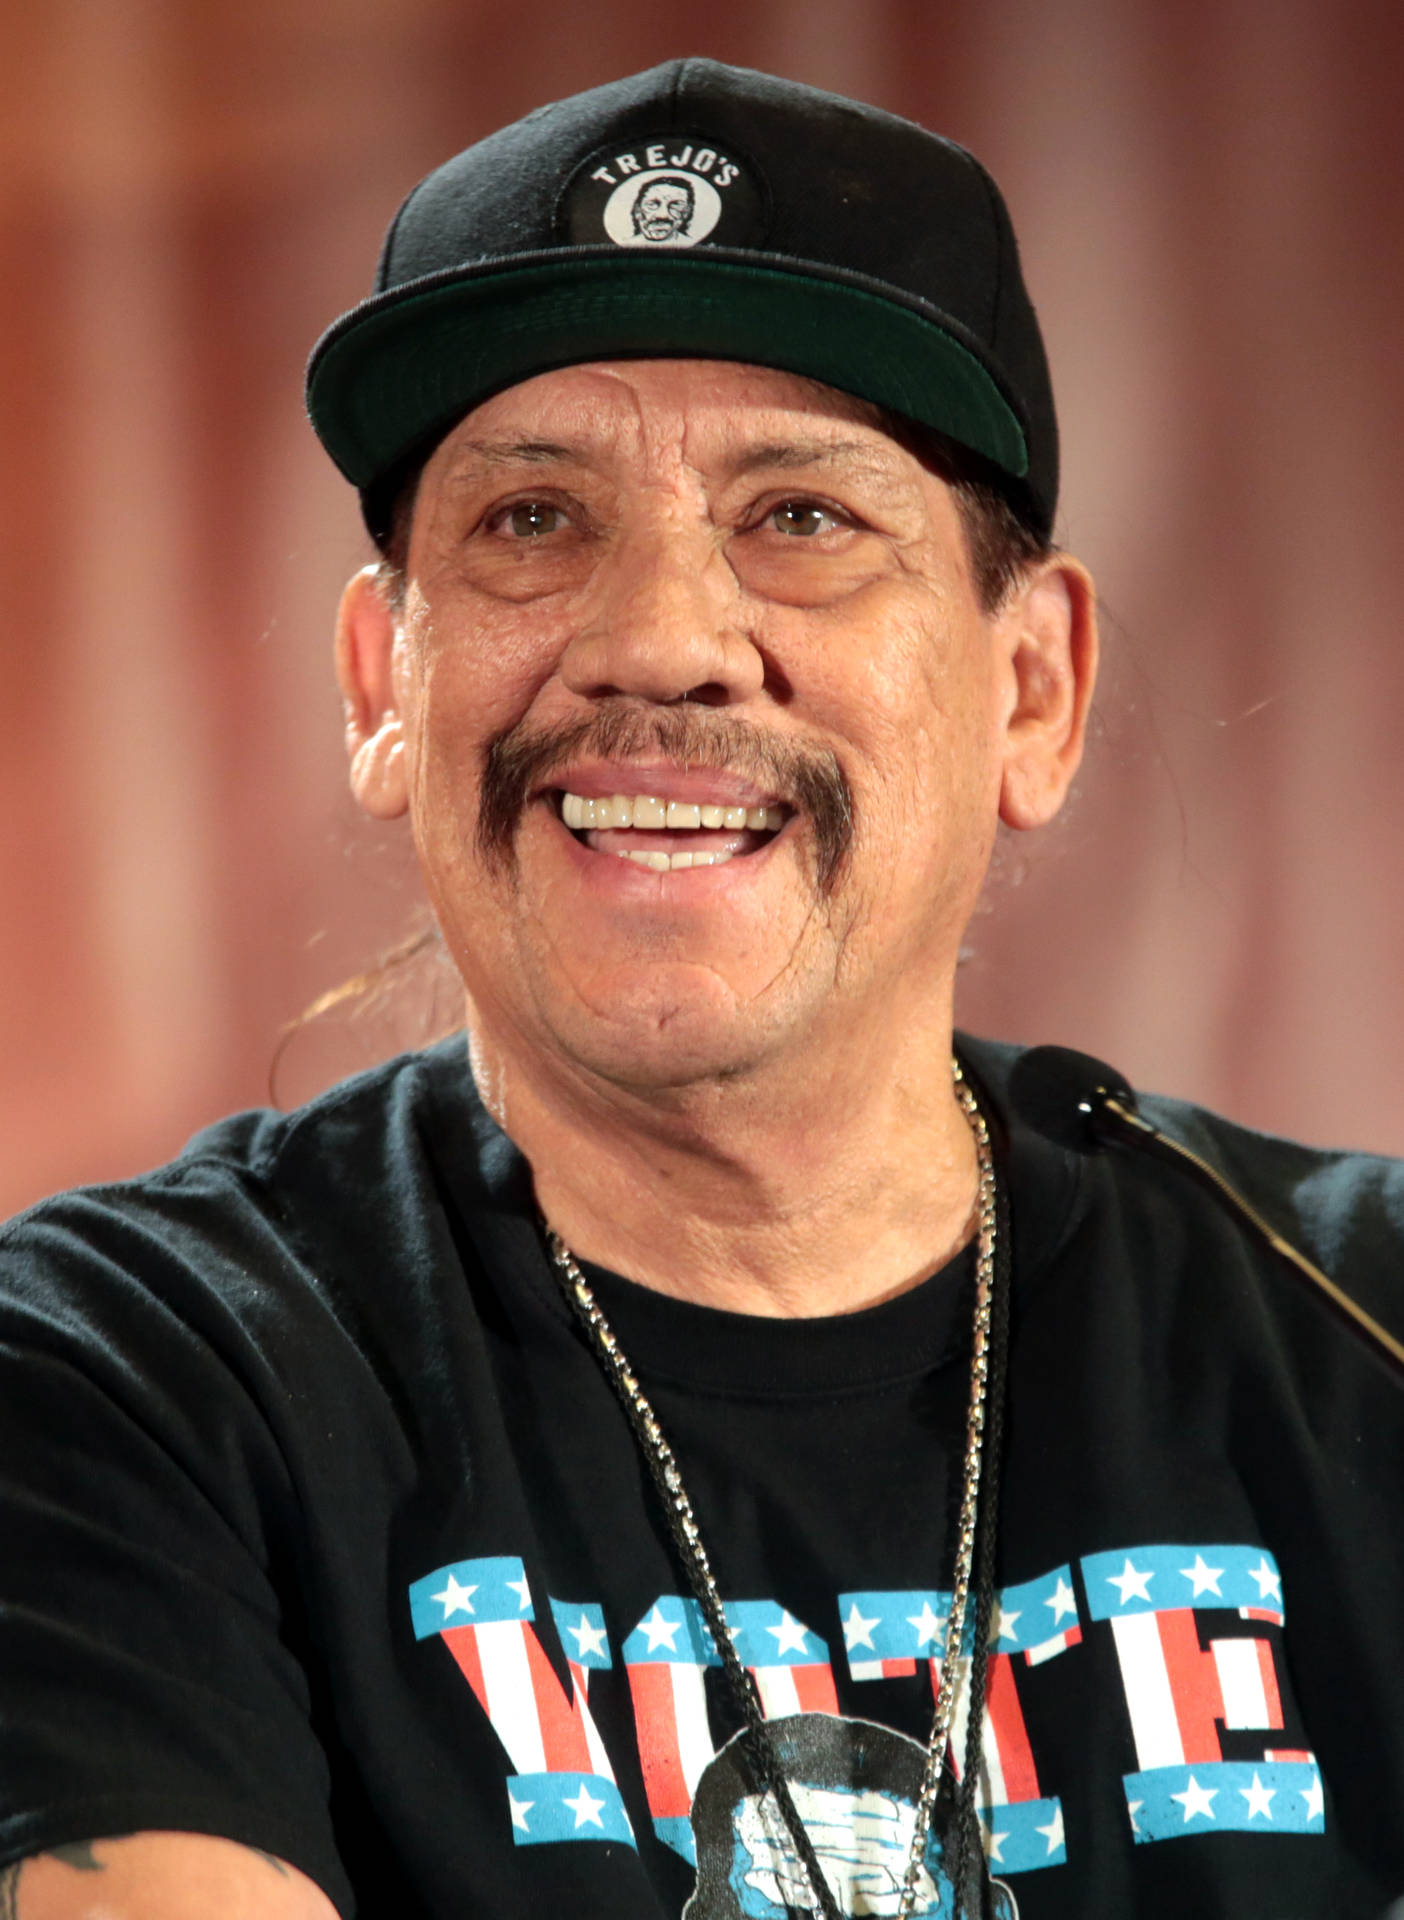 Hollywood Icon Danny Trejo Sporting a VOTE Shirt Wallpaper